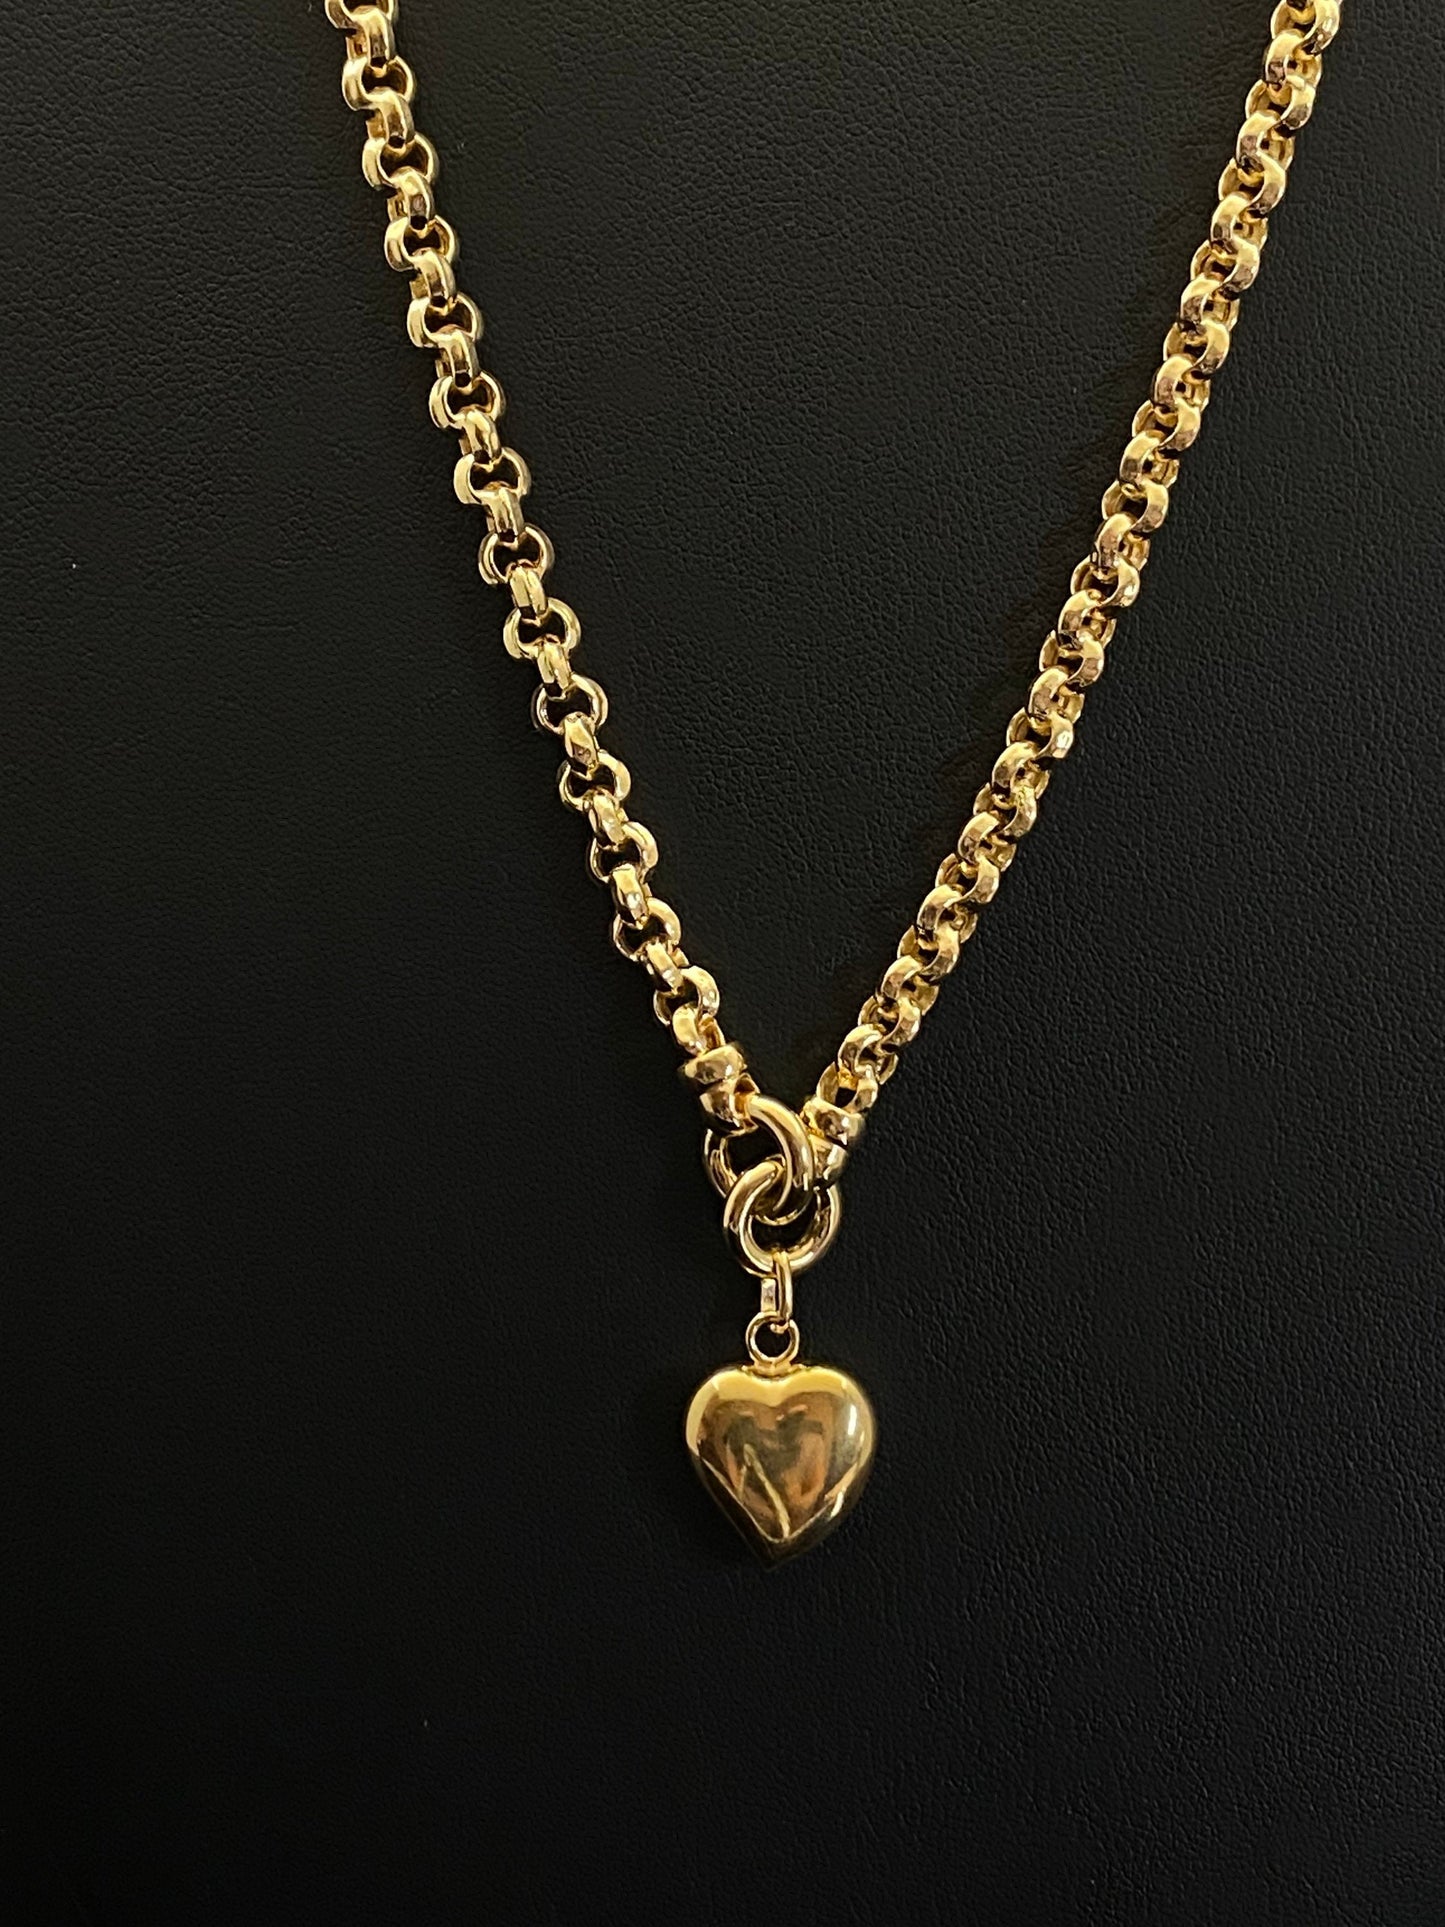 Yellow Gold Over Sterling Silver Rolo Heart Charm Necklace